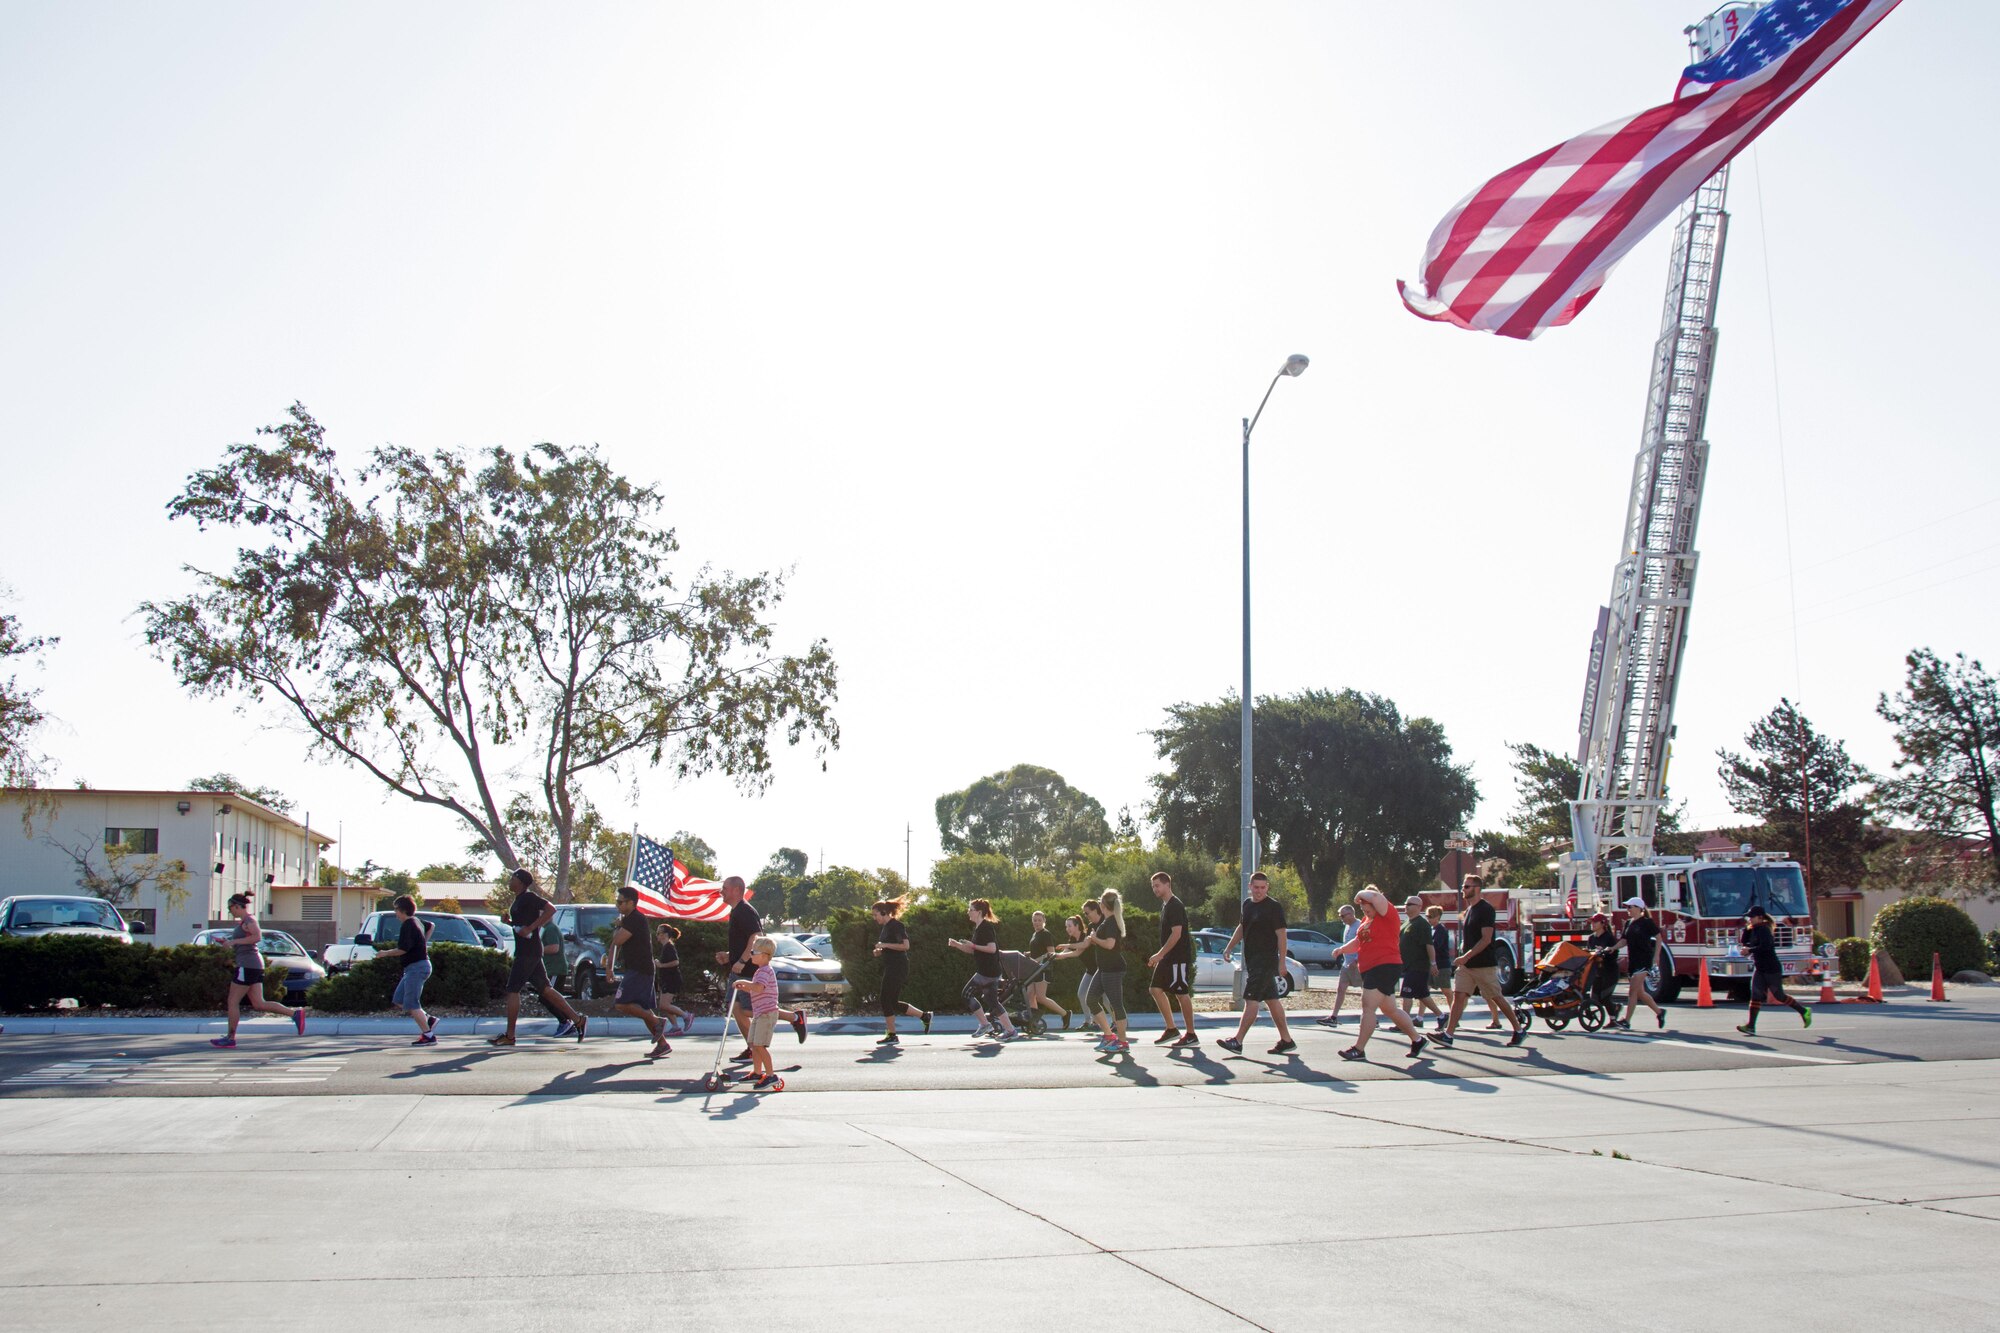 Runners take off at the start of the Run for the Fallen event on Sept. 10, 2016 at Travis Air Force Base, Calif. The Run for the Fallen was a 3.43 mile run organized by the 60th and 349th Civil Engineer Squadrons to honor the 343 firefighters who lost their lives on Sept. 11, 2001. (U.S. Air Force photo by Senior Airman Shelby R. Horn/Released)